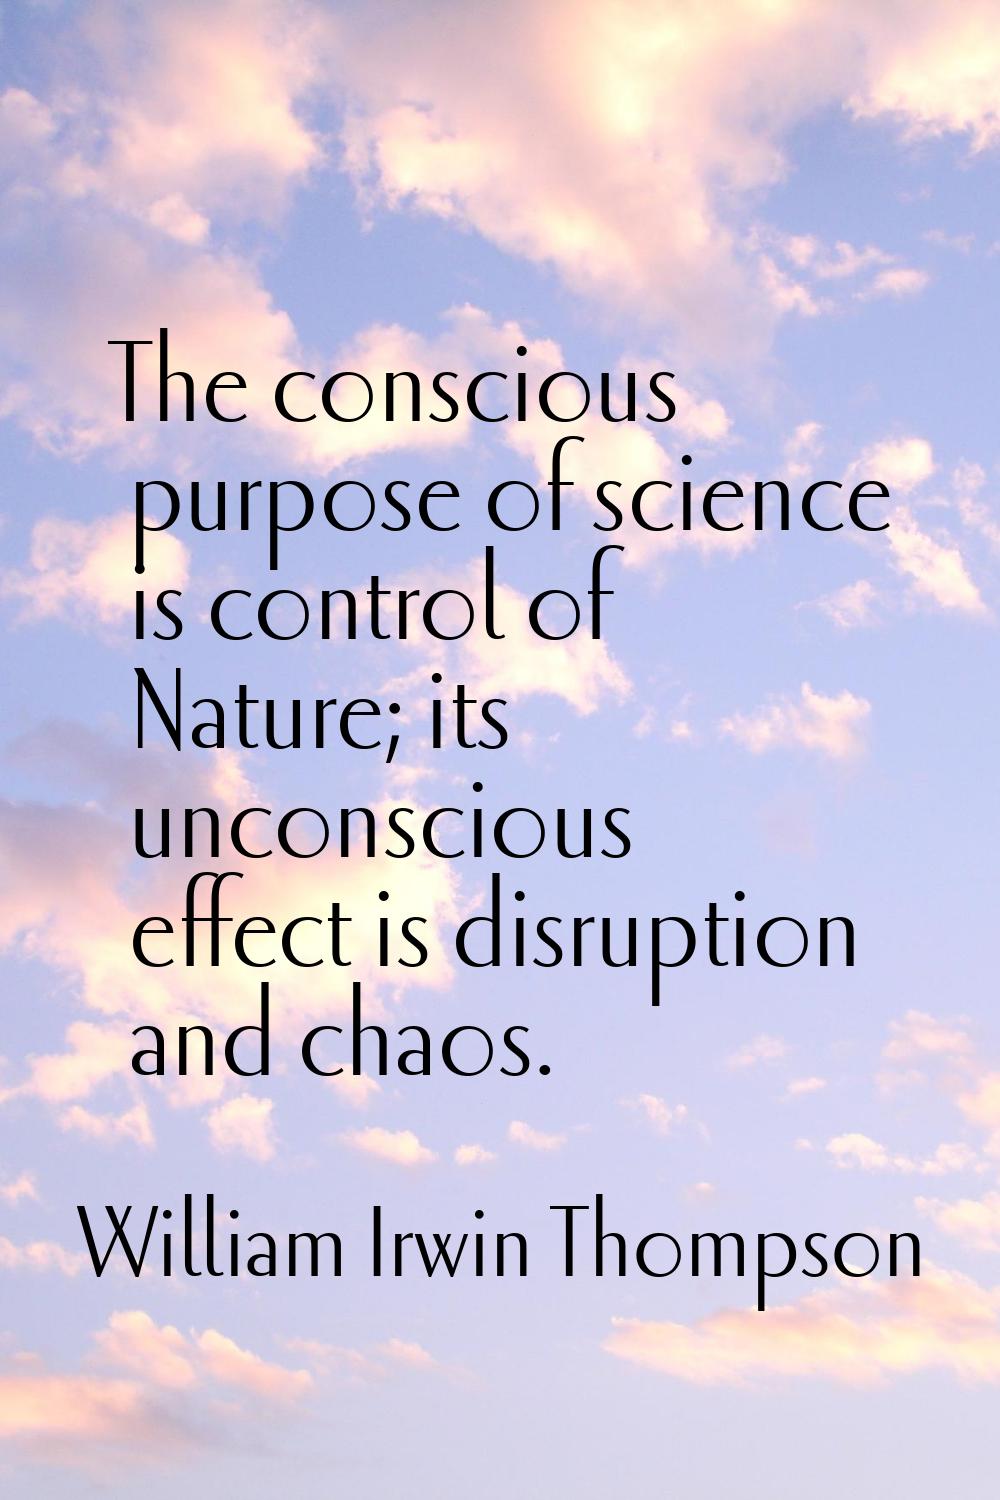 The conscious purpose of science is control of Nature; its unconscious effect is disruption and cha